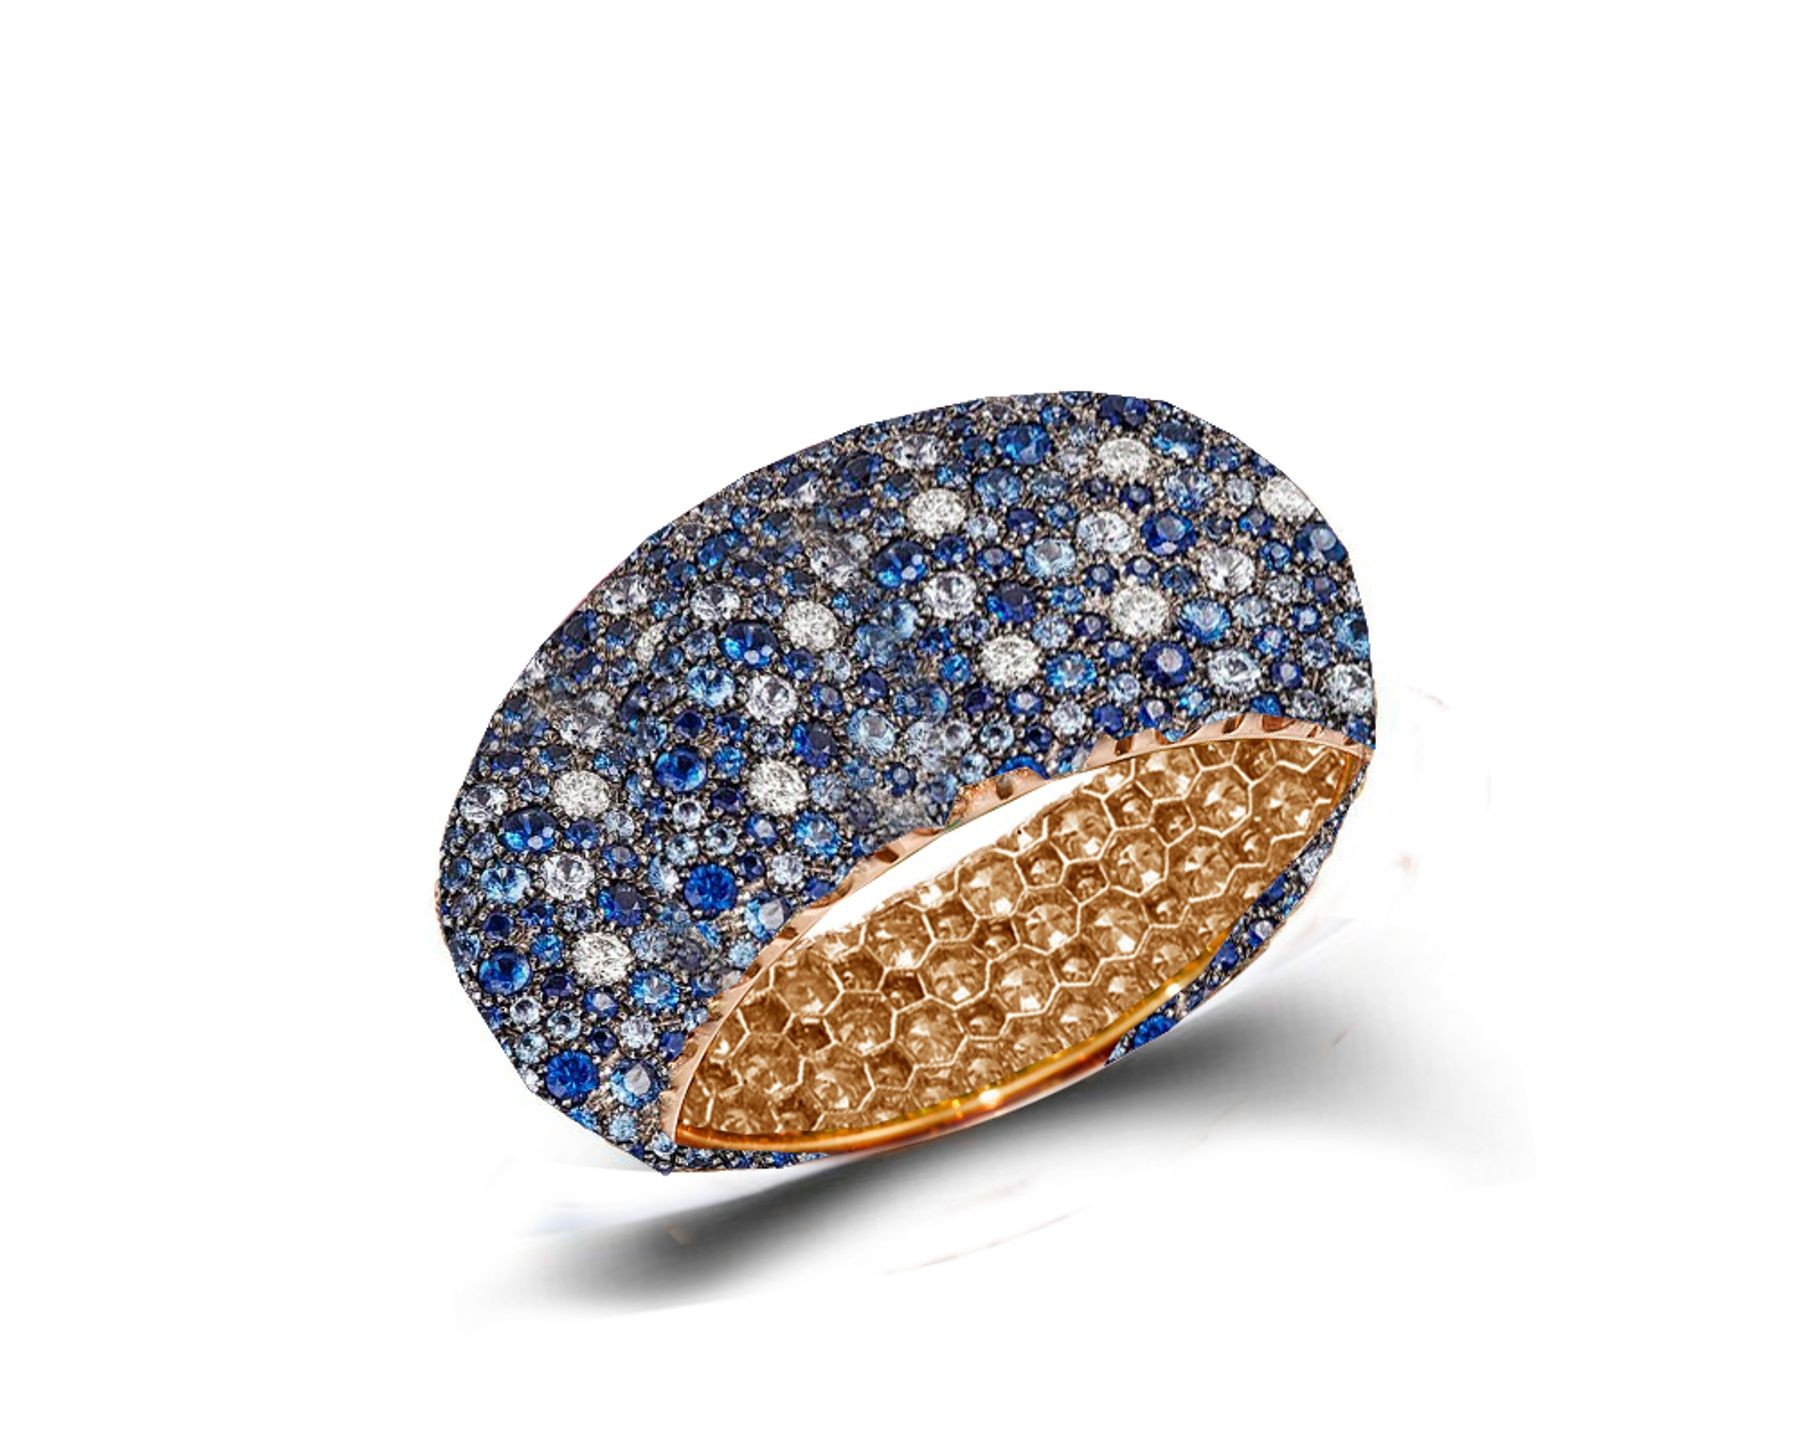 Eternity Ring with Diamonds & Blue Sapphires in Gold or Platinum